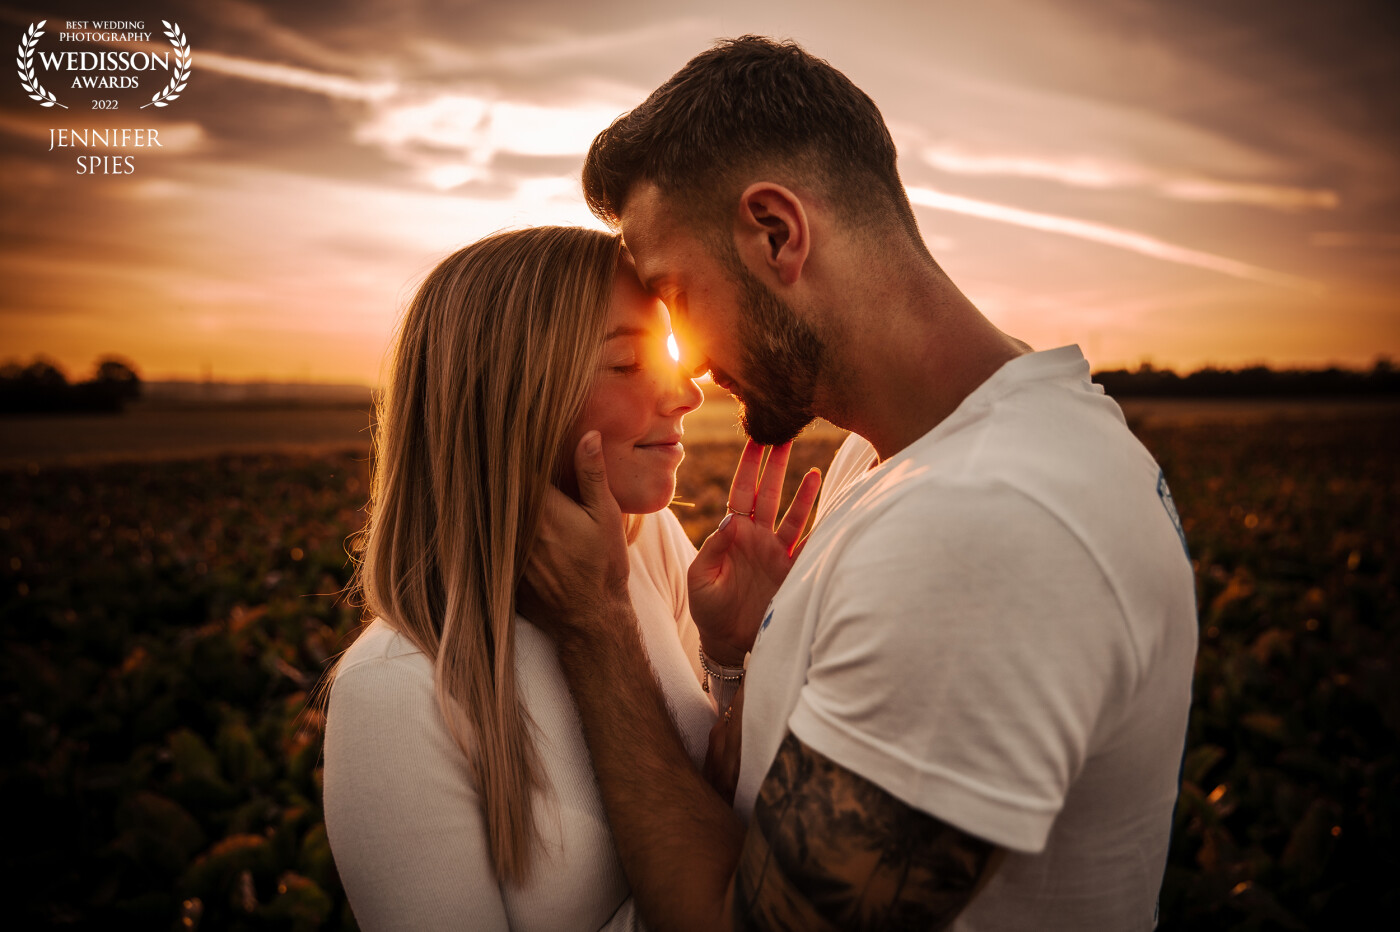 Shooting with Alina and Paco. What could be nicer than being in love and capturing this feeling in the form of pictures. There was also this beautiful sunset.